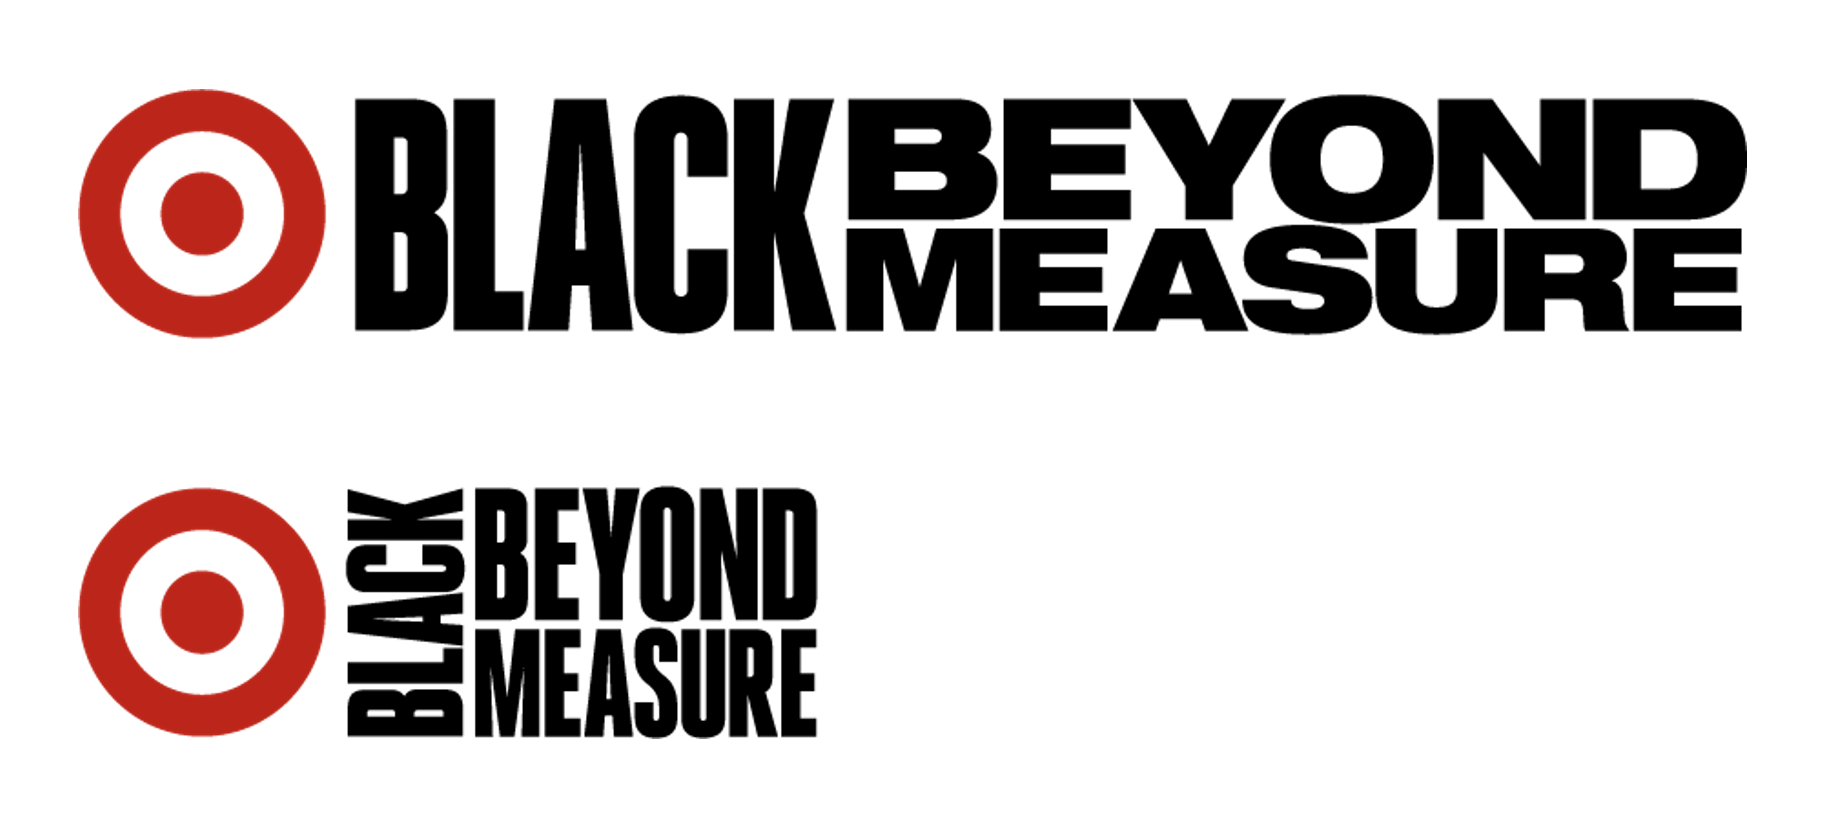 Black Beyond Measure: How Black History Month Comes to Life at Target